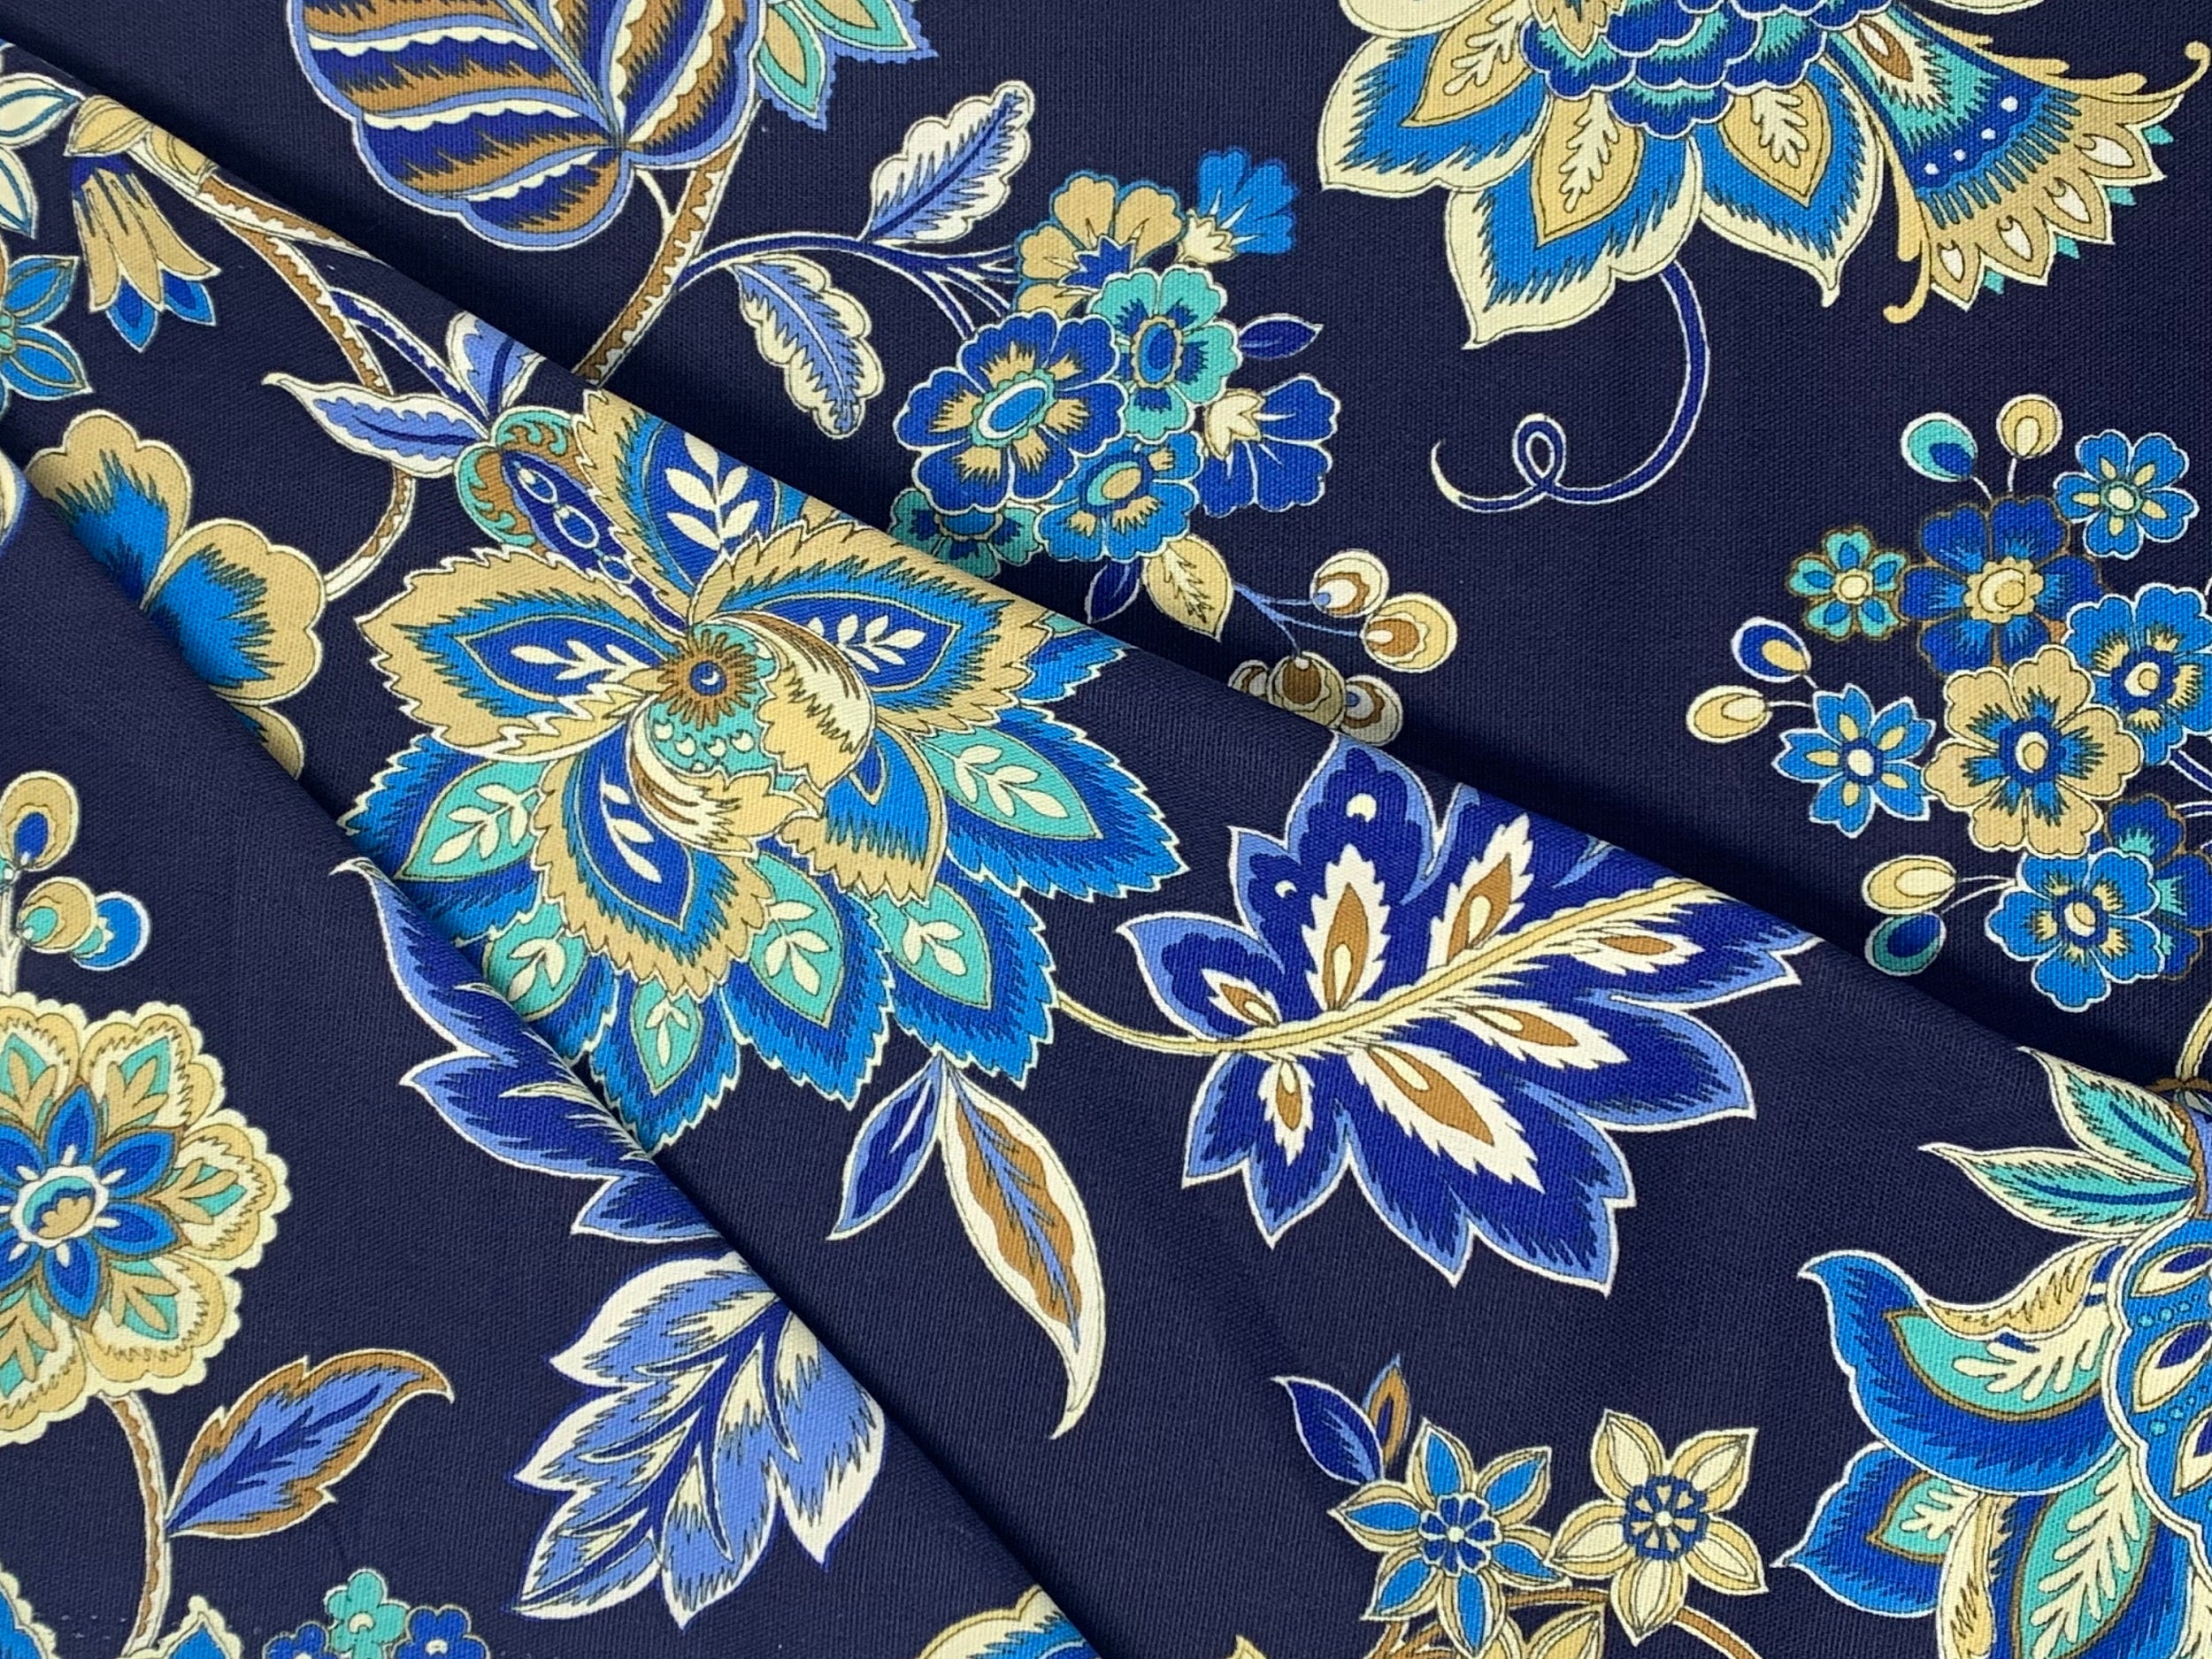 Waverly Inspirations 100% Cotton Duck 45" Width Floral Blue Color Sewing Fabric by the Yard